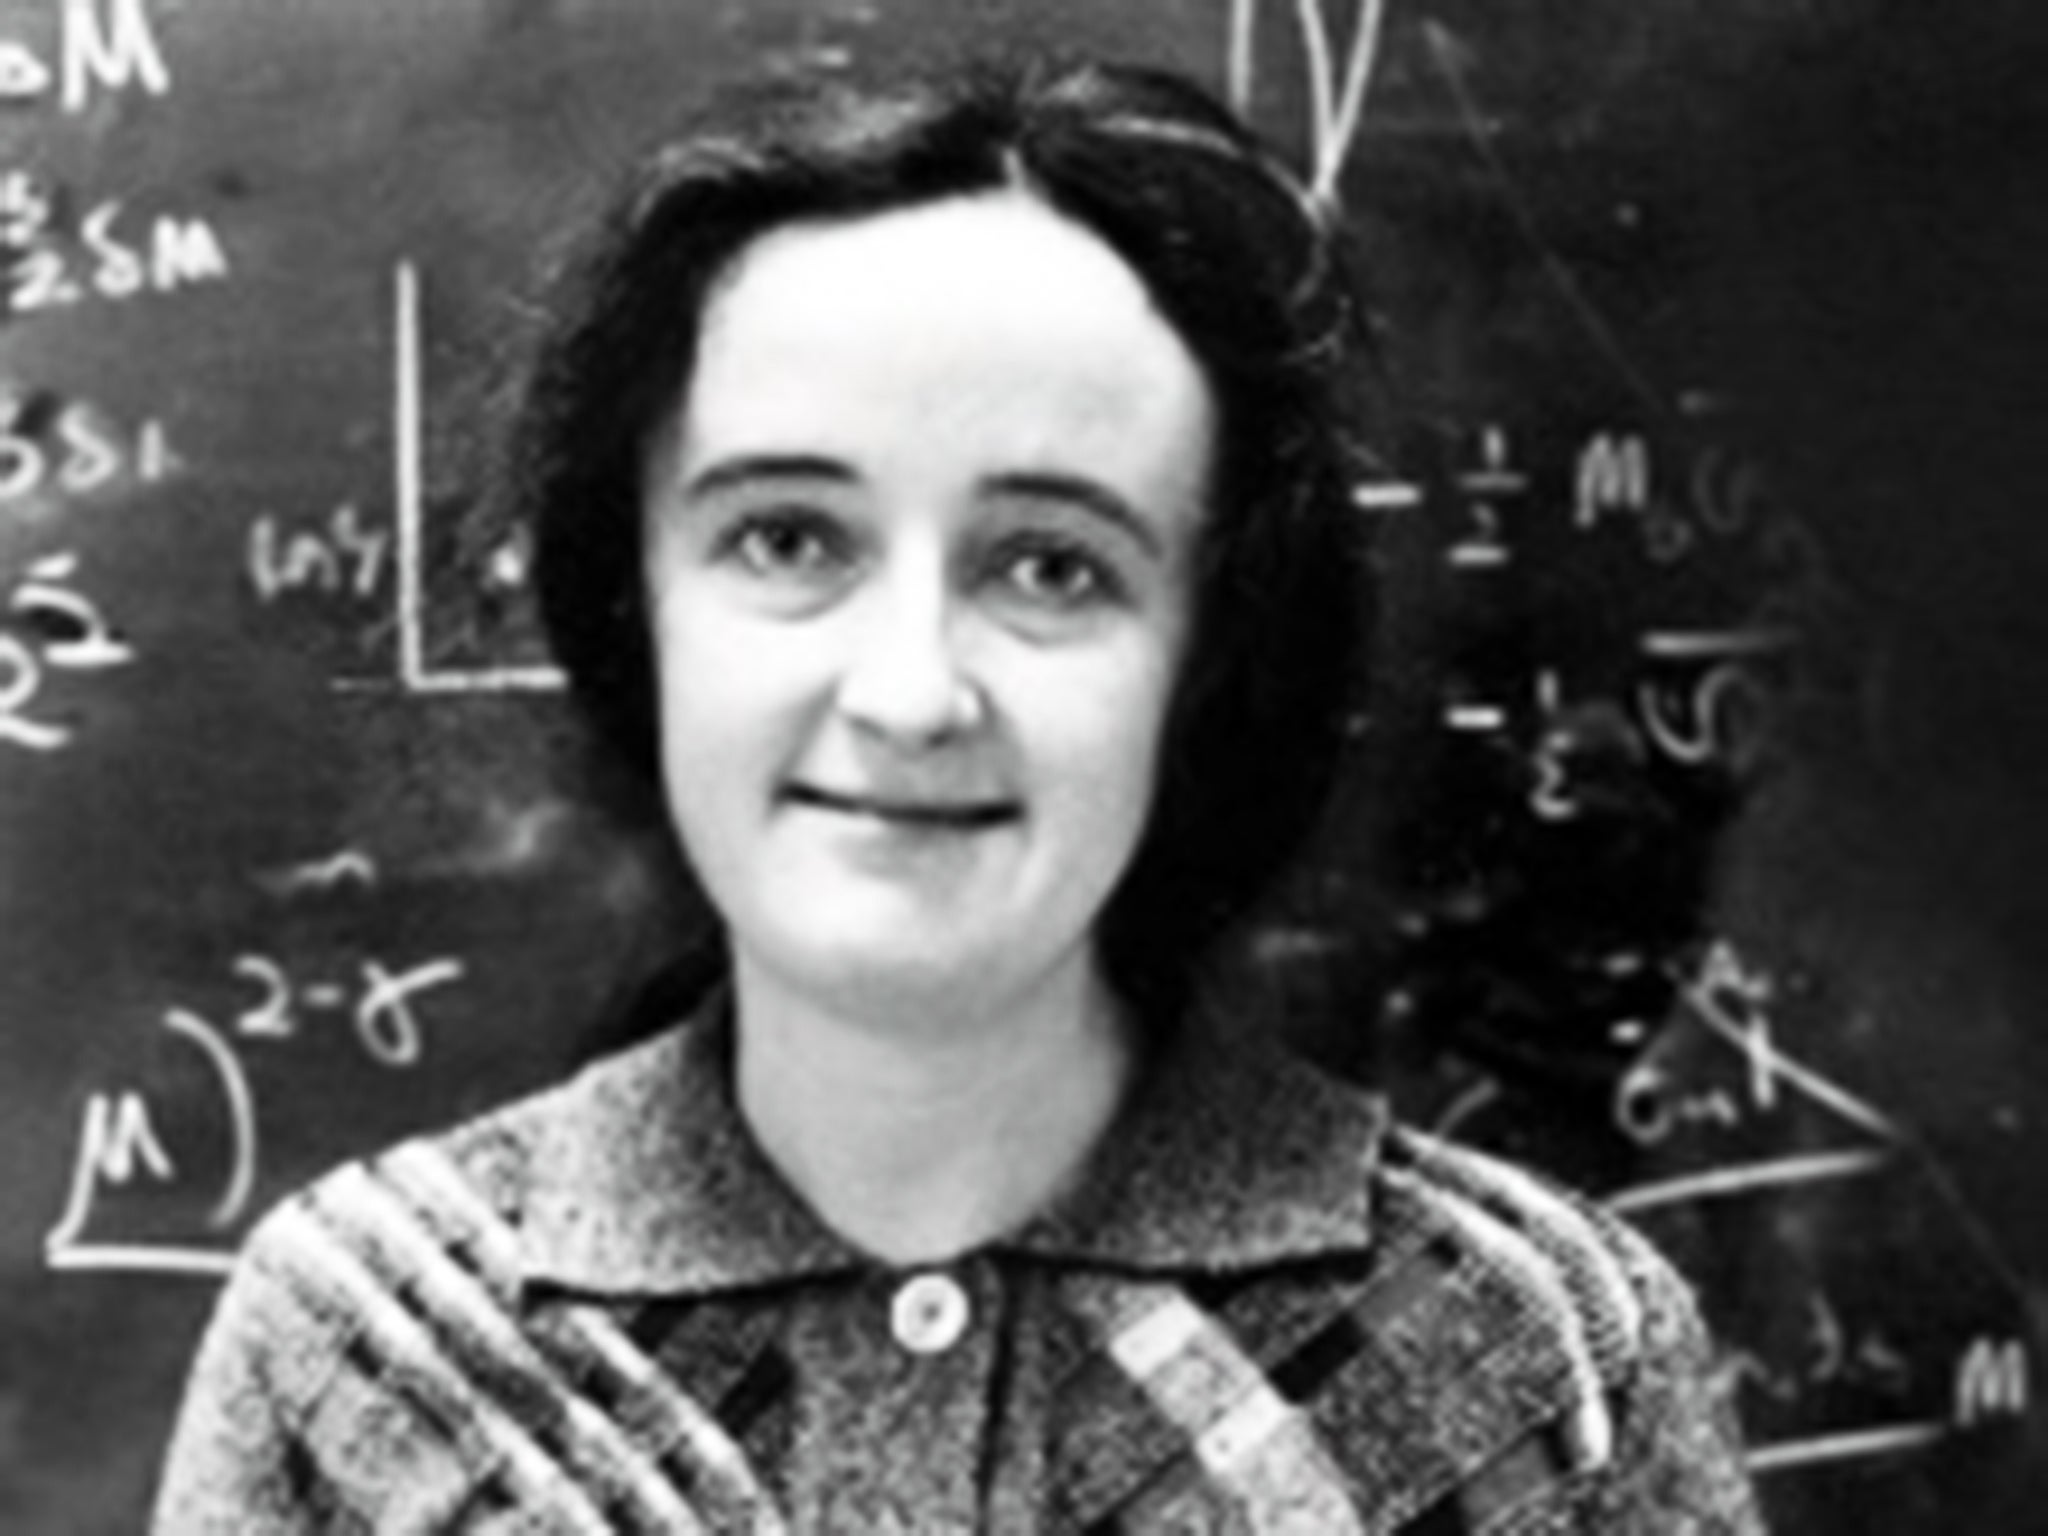 Astronomer Beatrice Tinsley calculated models for types of galaxies